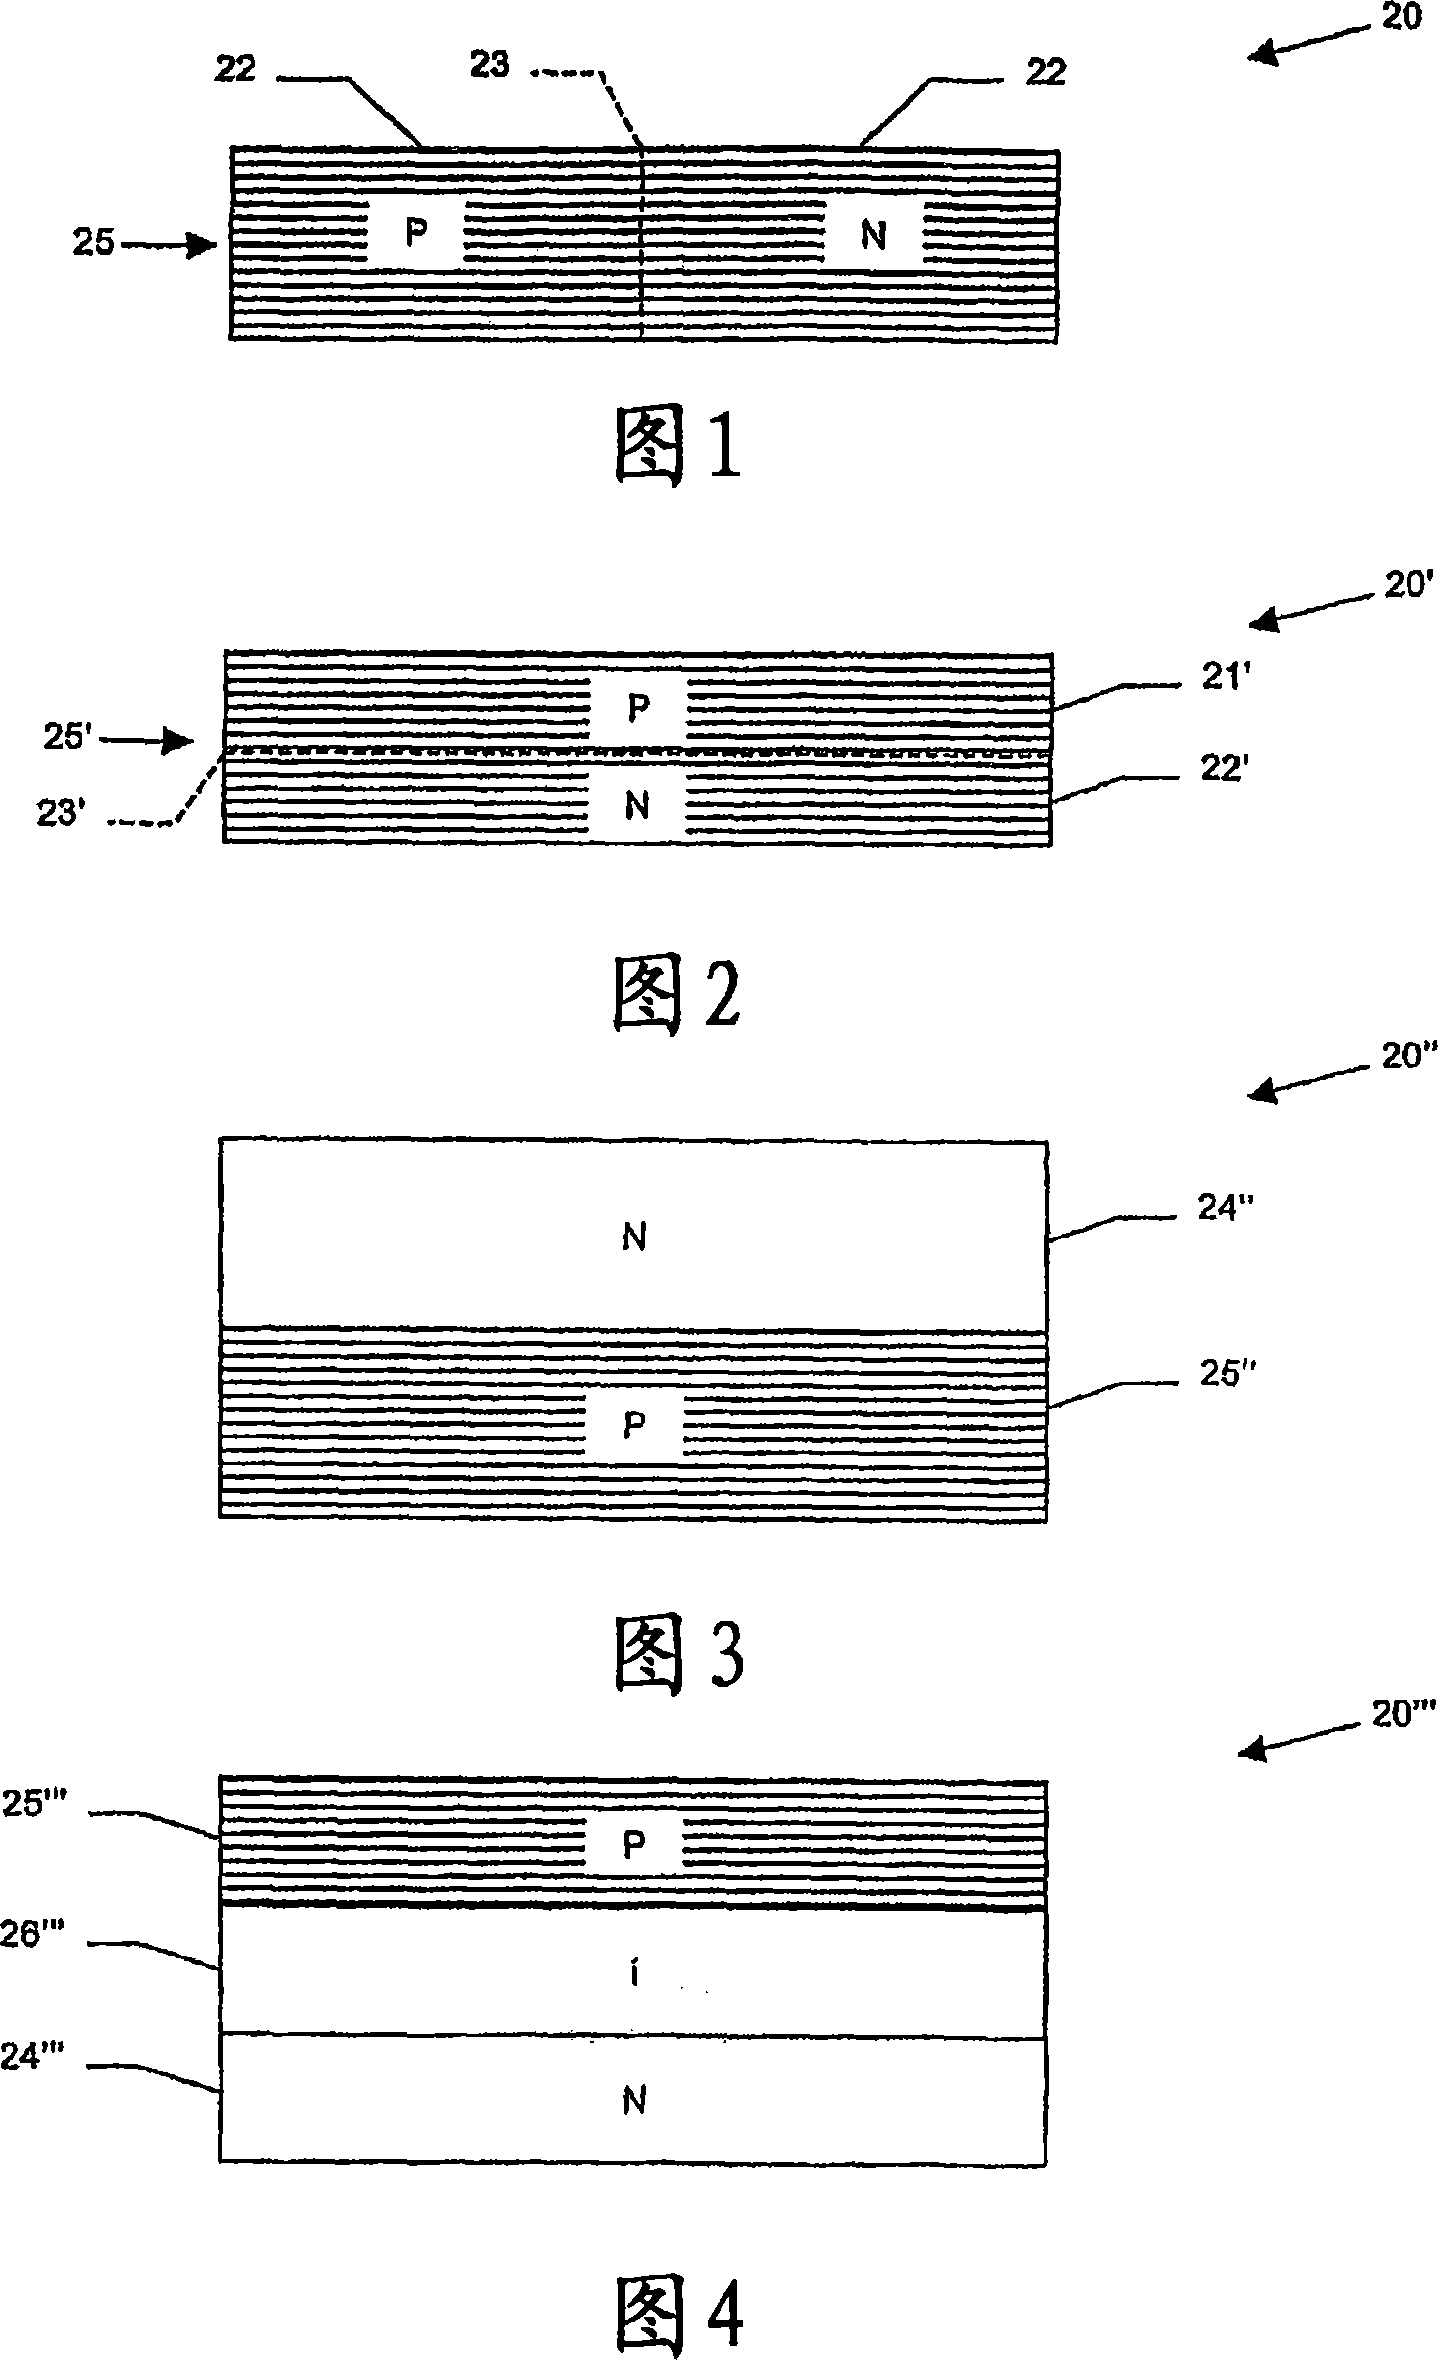 Semiconductor device including a superlattice and adjacent semiconductor layer with doped regions defining a semiconductor junction